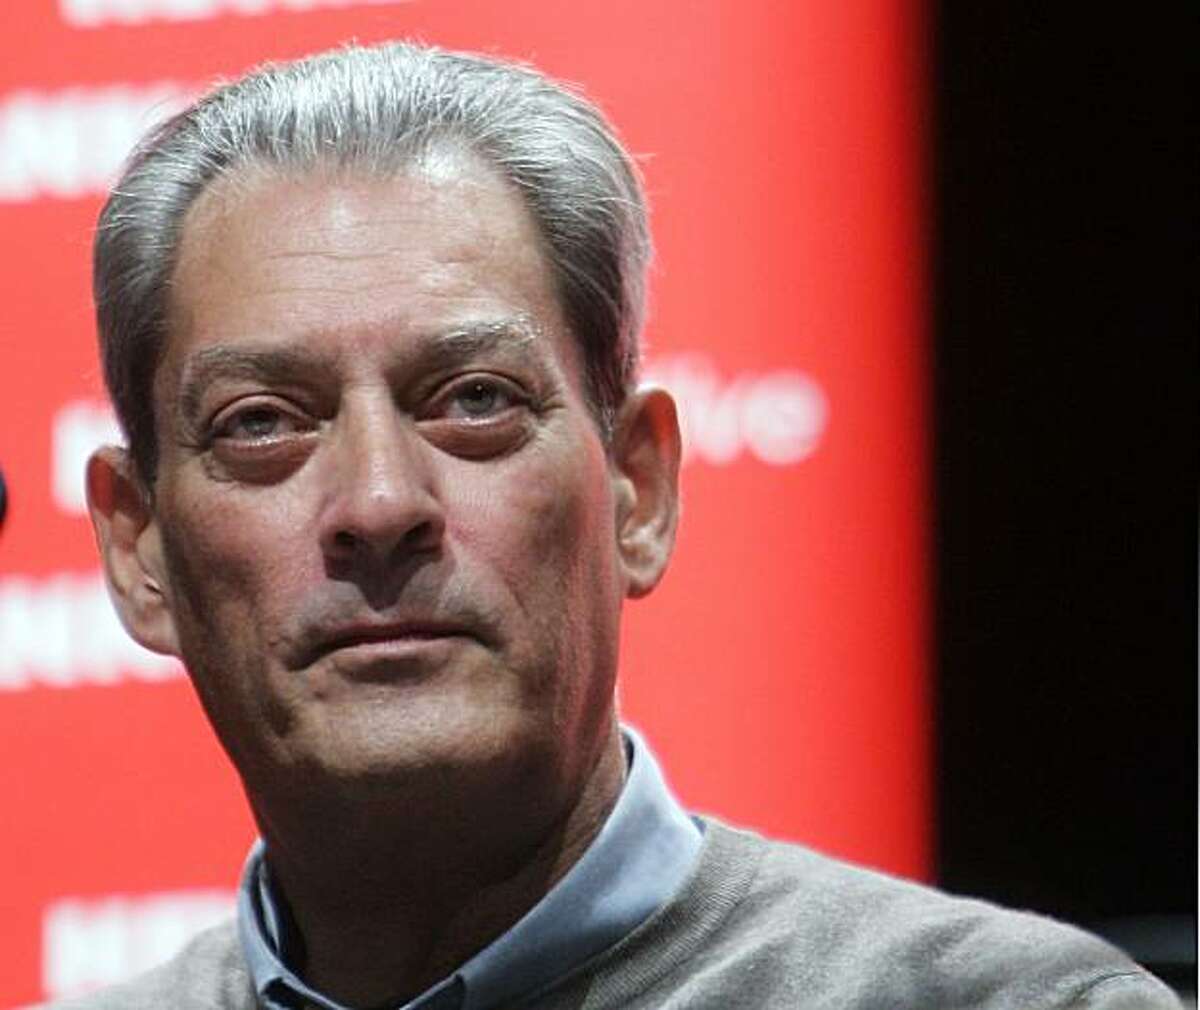 HAMBURG, GERMANY - SEPTEMBER 30: Best selling author Paul Auster lectures from his new book 'Man in Darkness' at Kampnagel on September 30, 2008 in Hamburg, Germany. (Photo by Krafft Angerer/Getty Images)